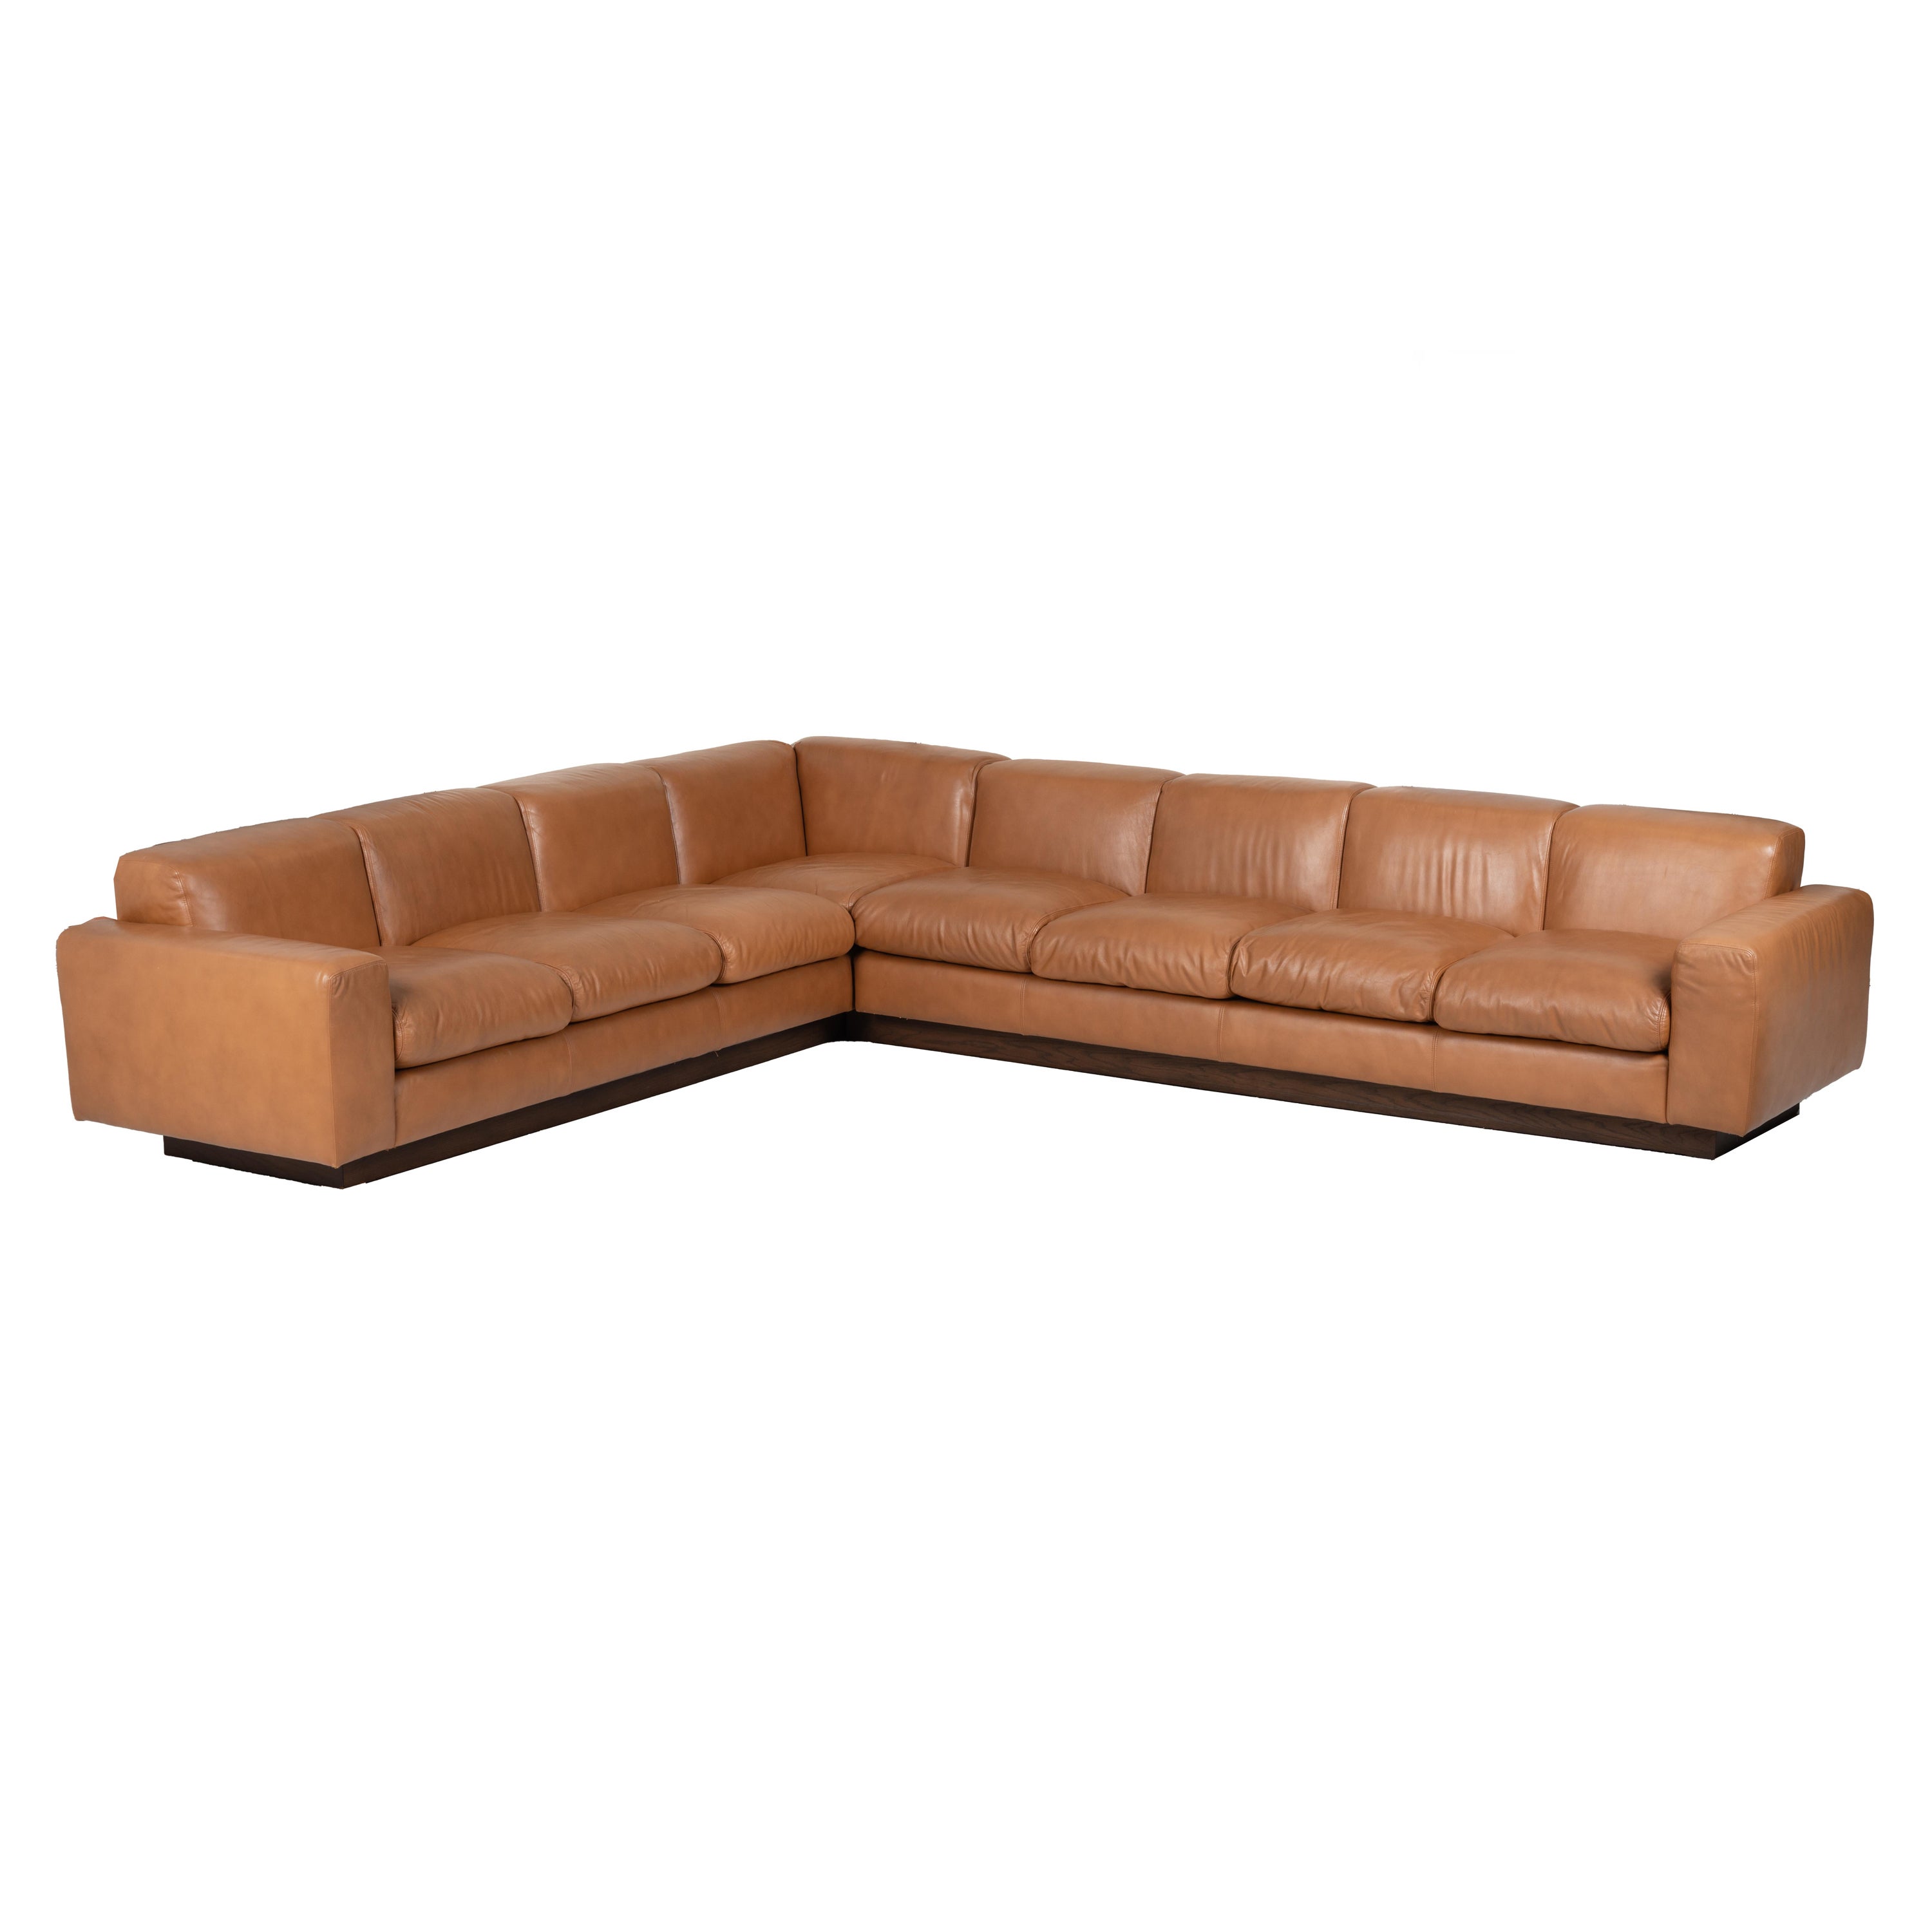 1970's Custom Leather Sectional Sofa For Sale